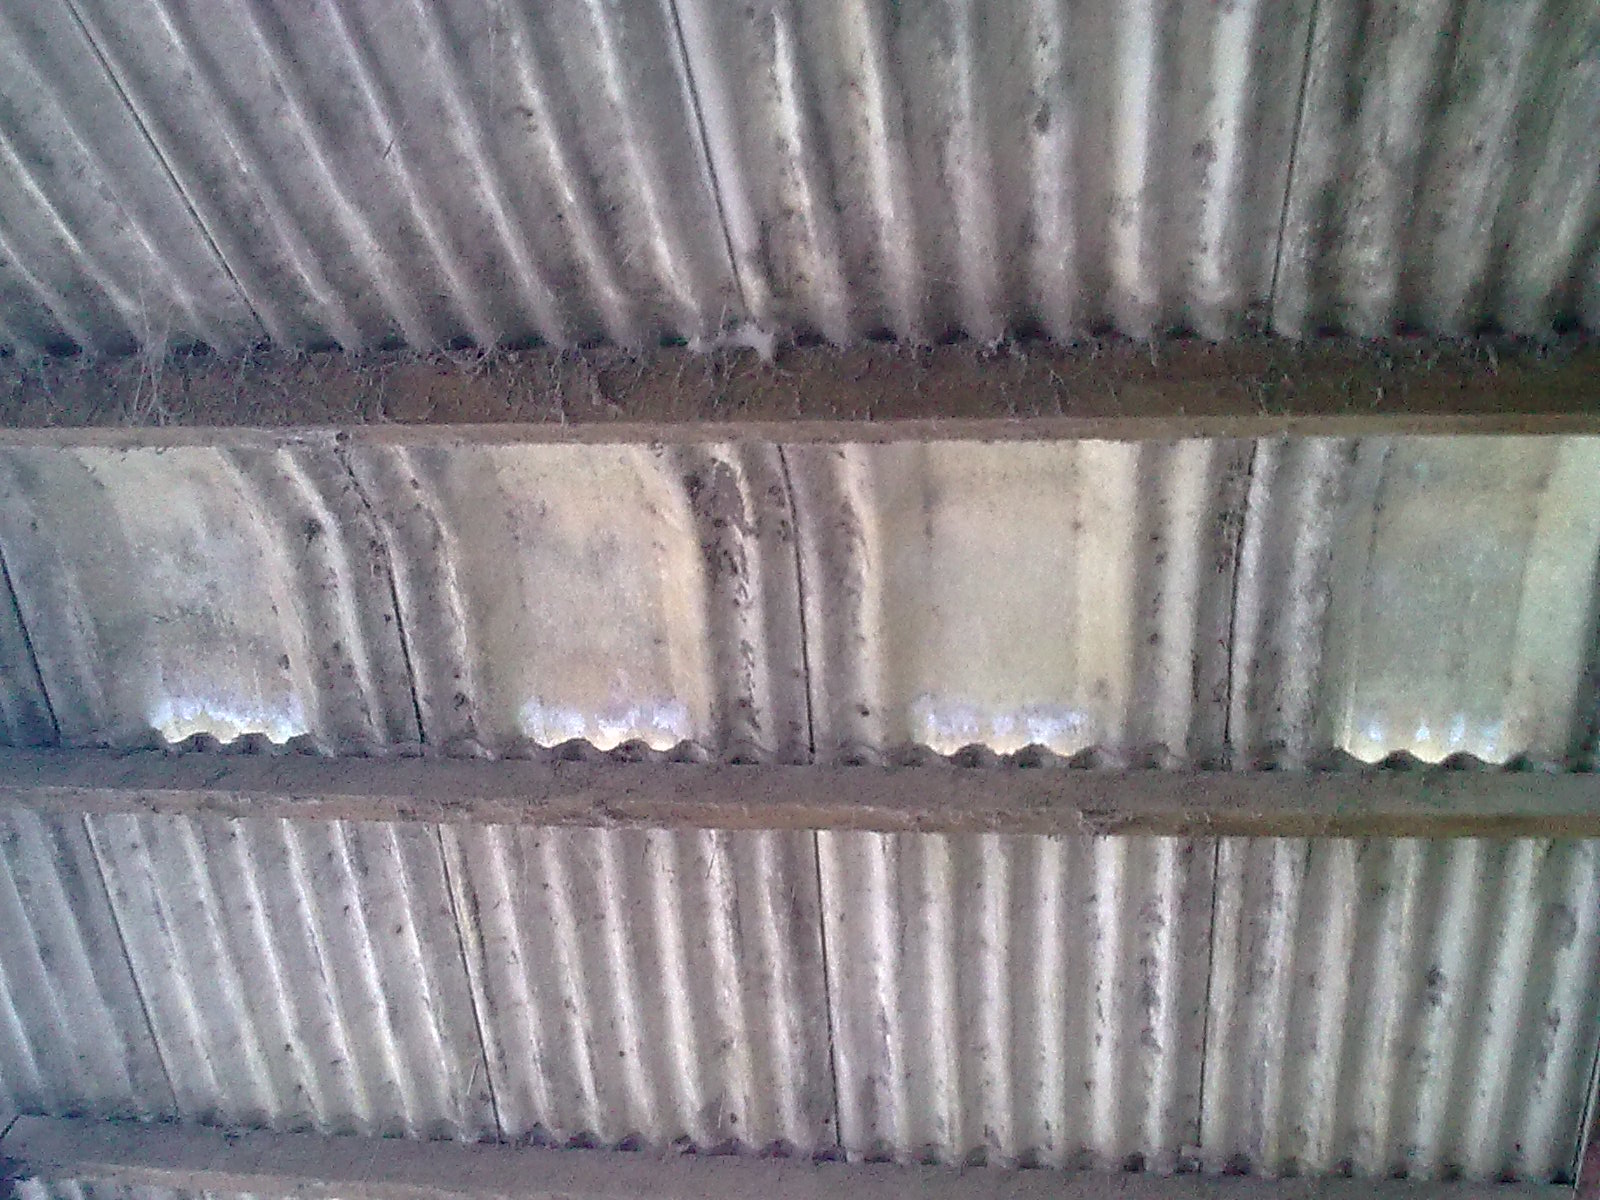 another example of a cranked ridge design, in situ